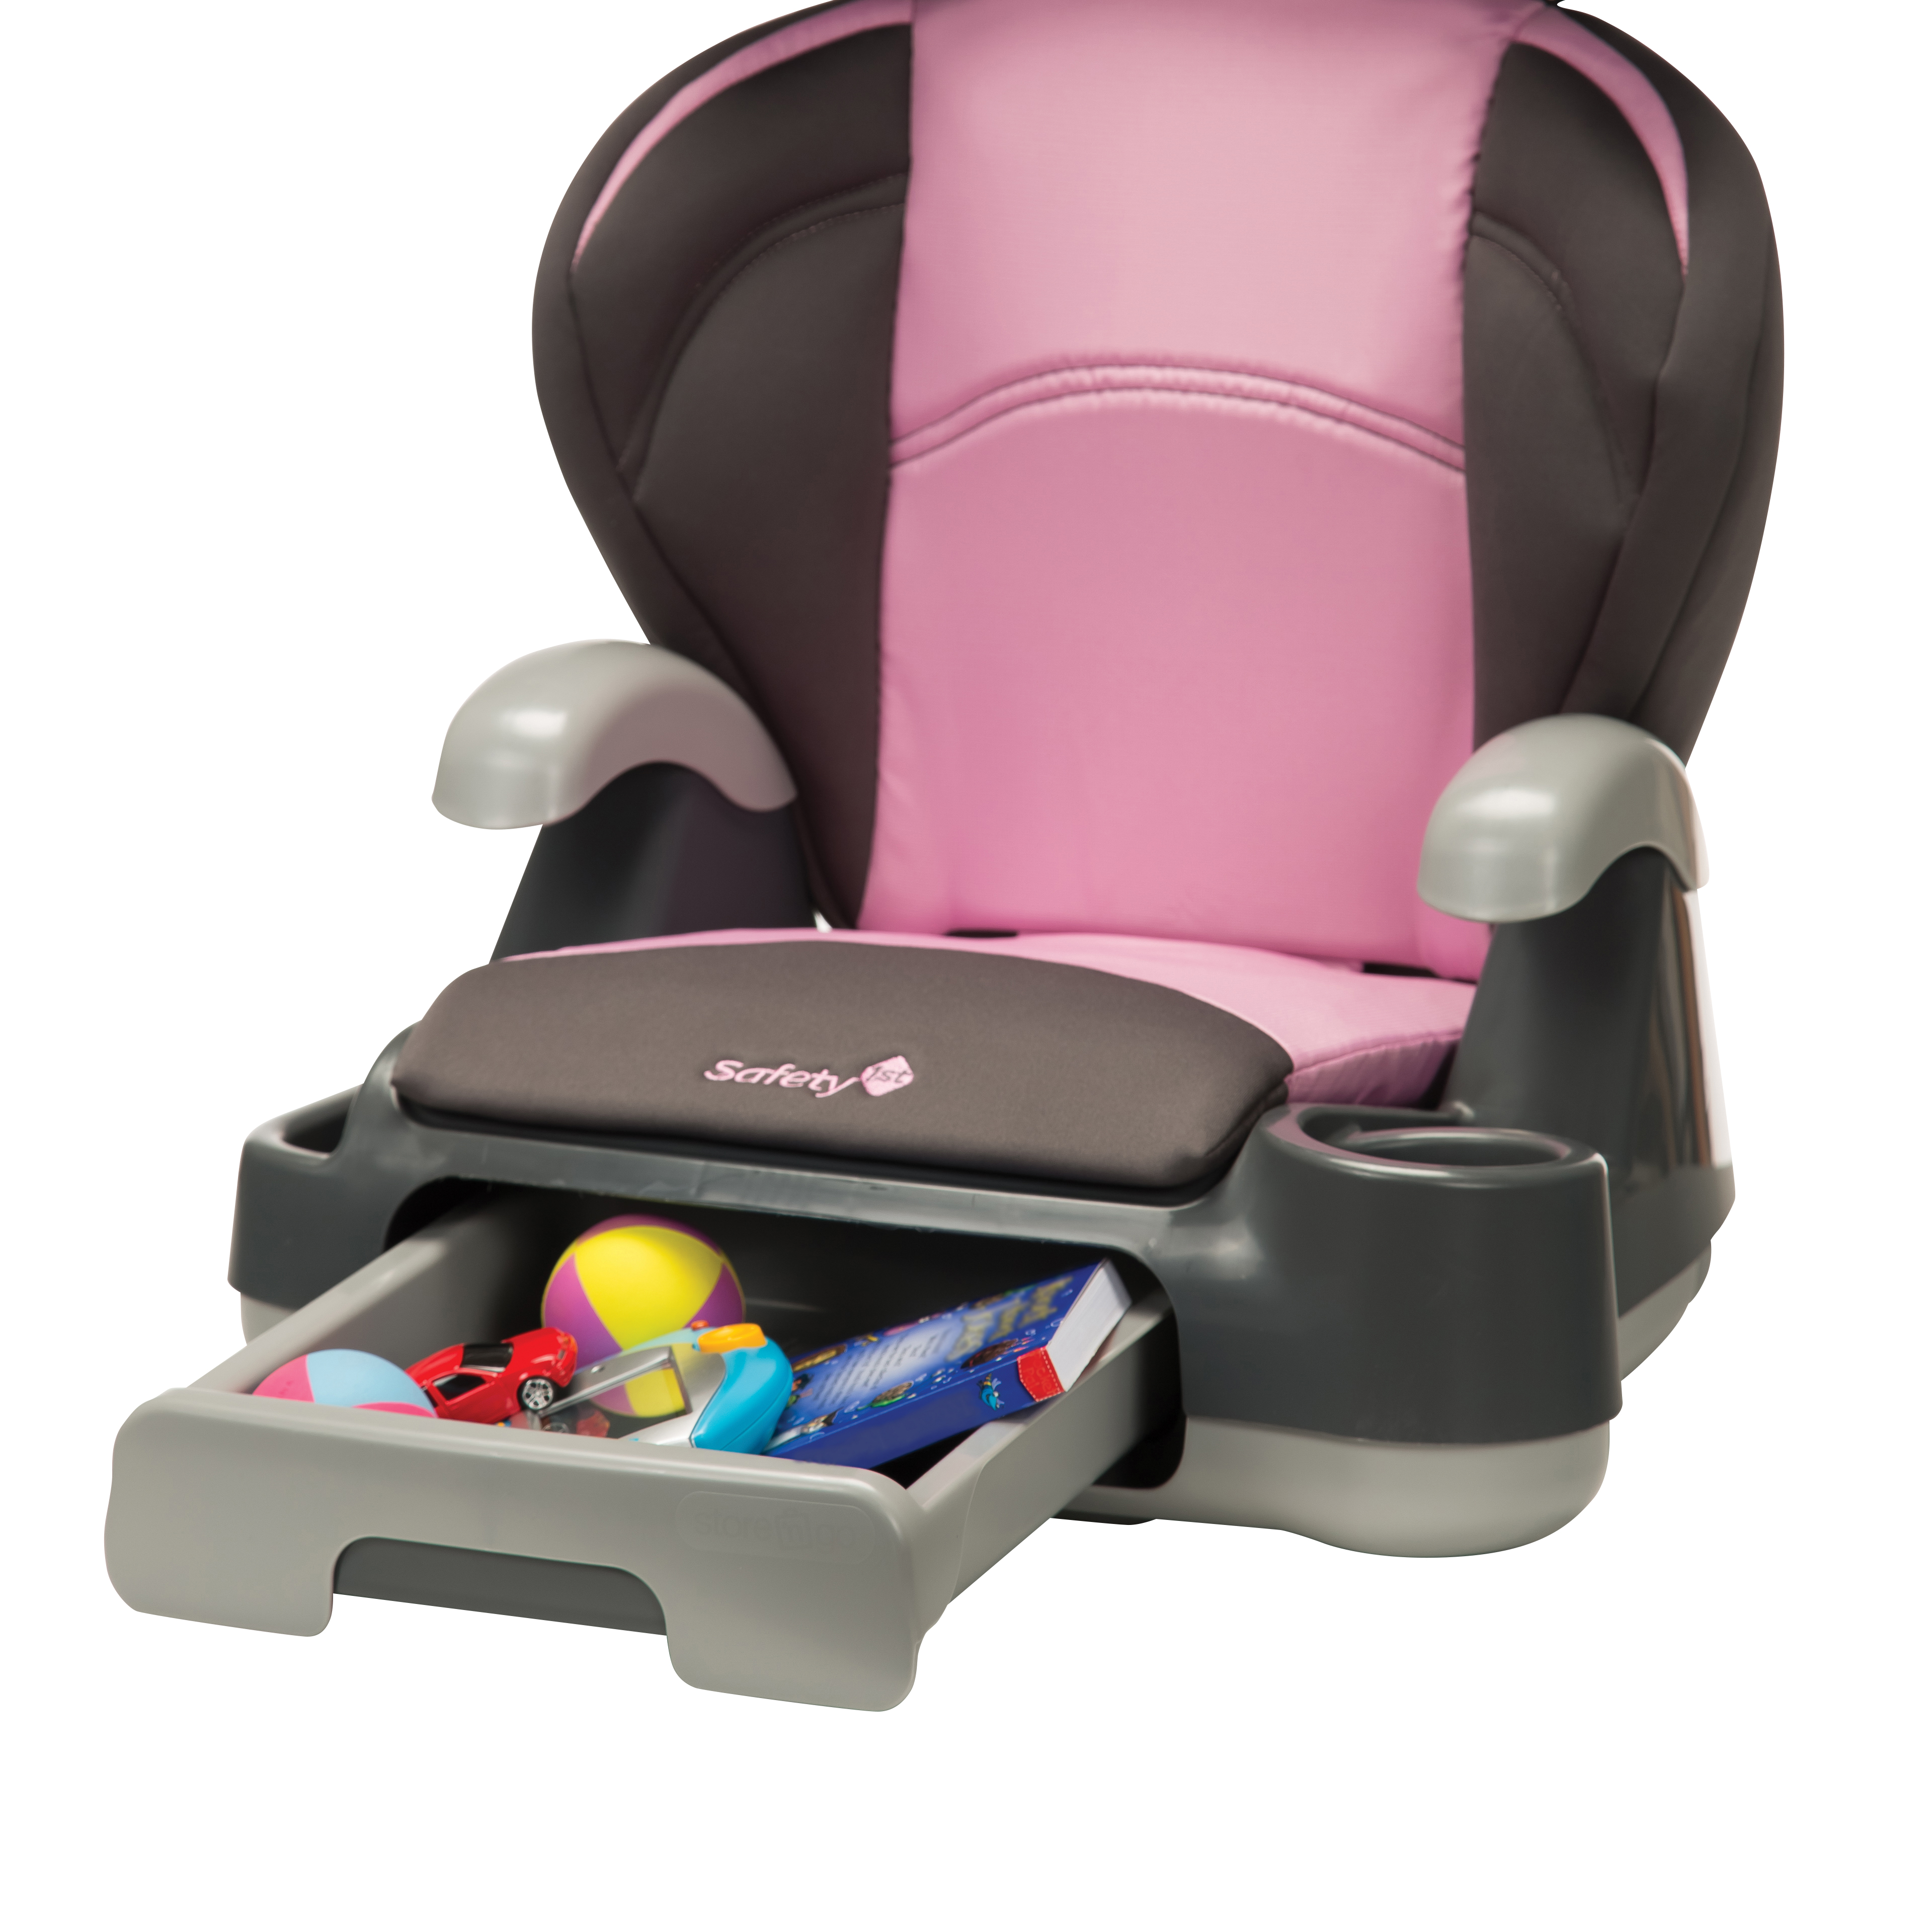 Safety 1st Store 'n Go Belt-Positioning Booster Car Seat, Nora - image 4 of 5